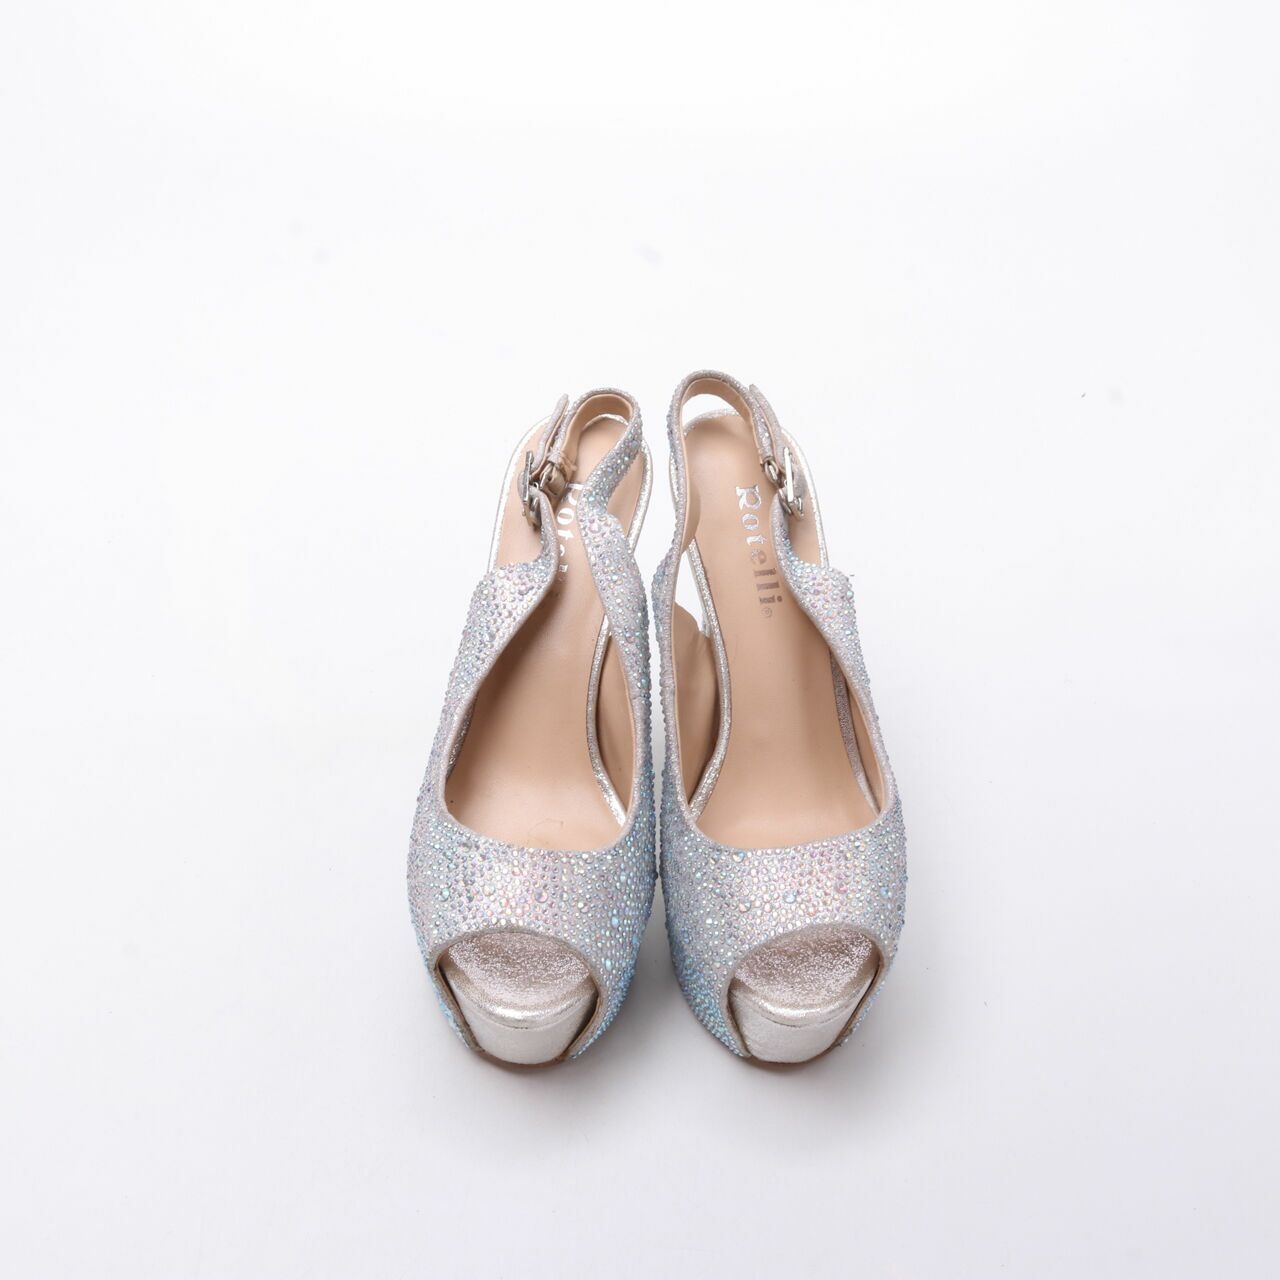 Rotelli Silver Sling Back Heels